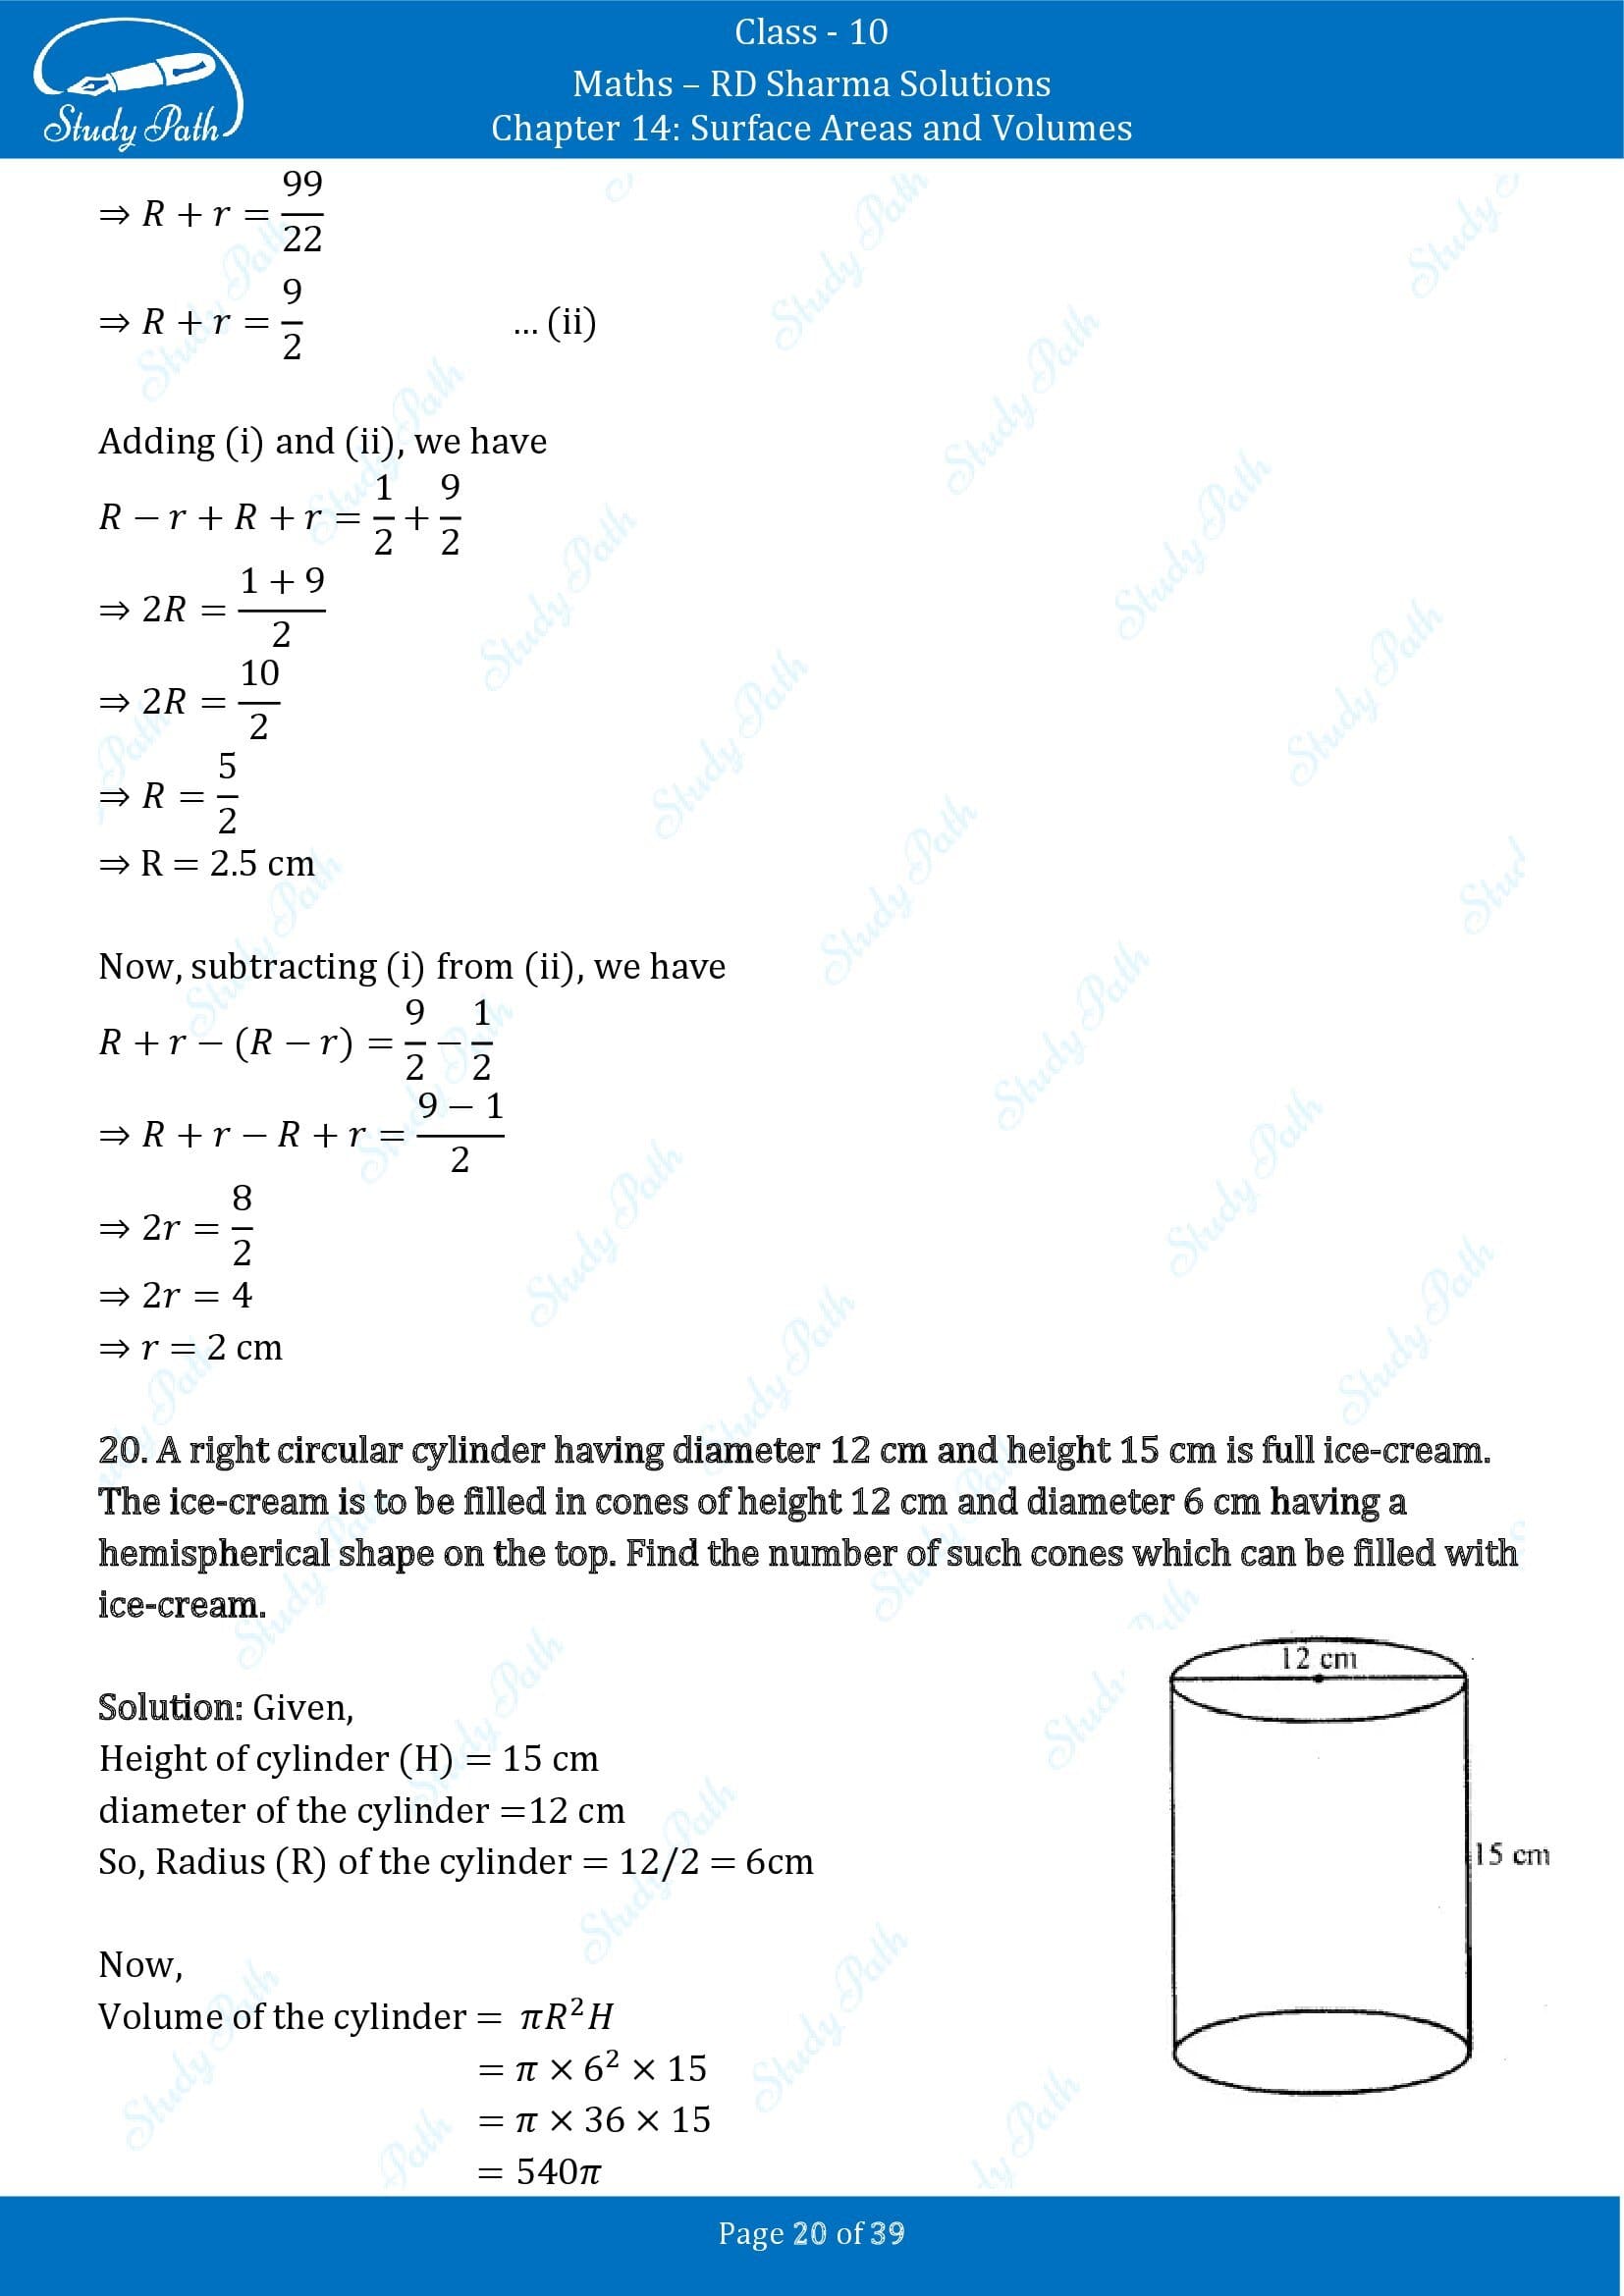 RD Sharma Solutions Class 10 Chapter 14 Surface Areas and Volumes Exercise 14.2 00020